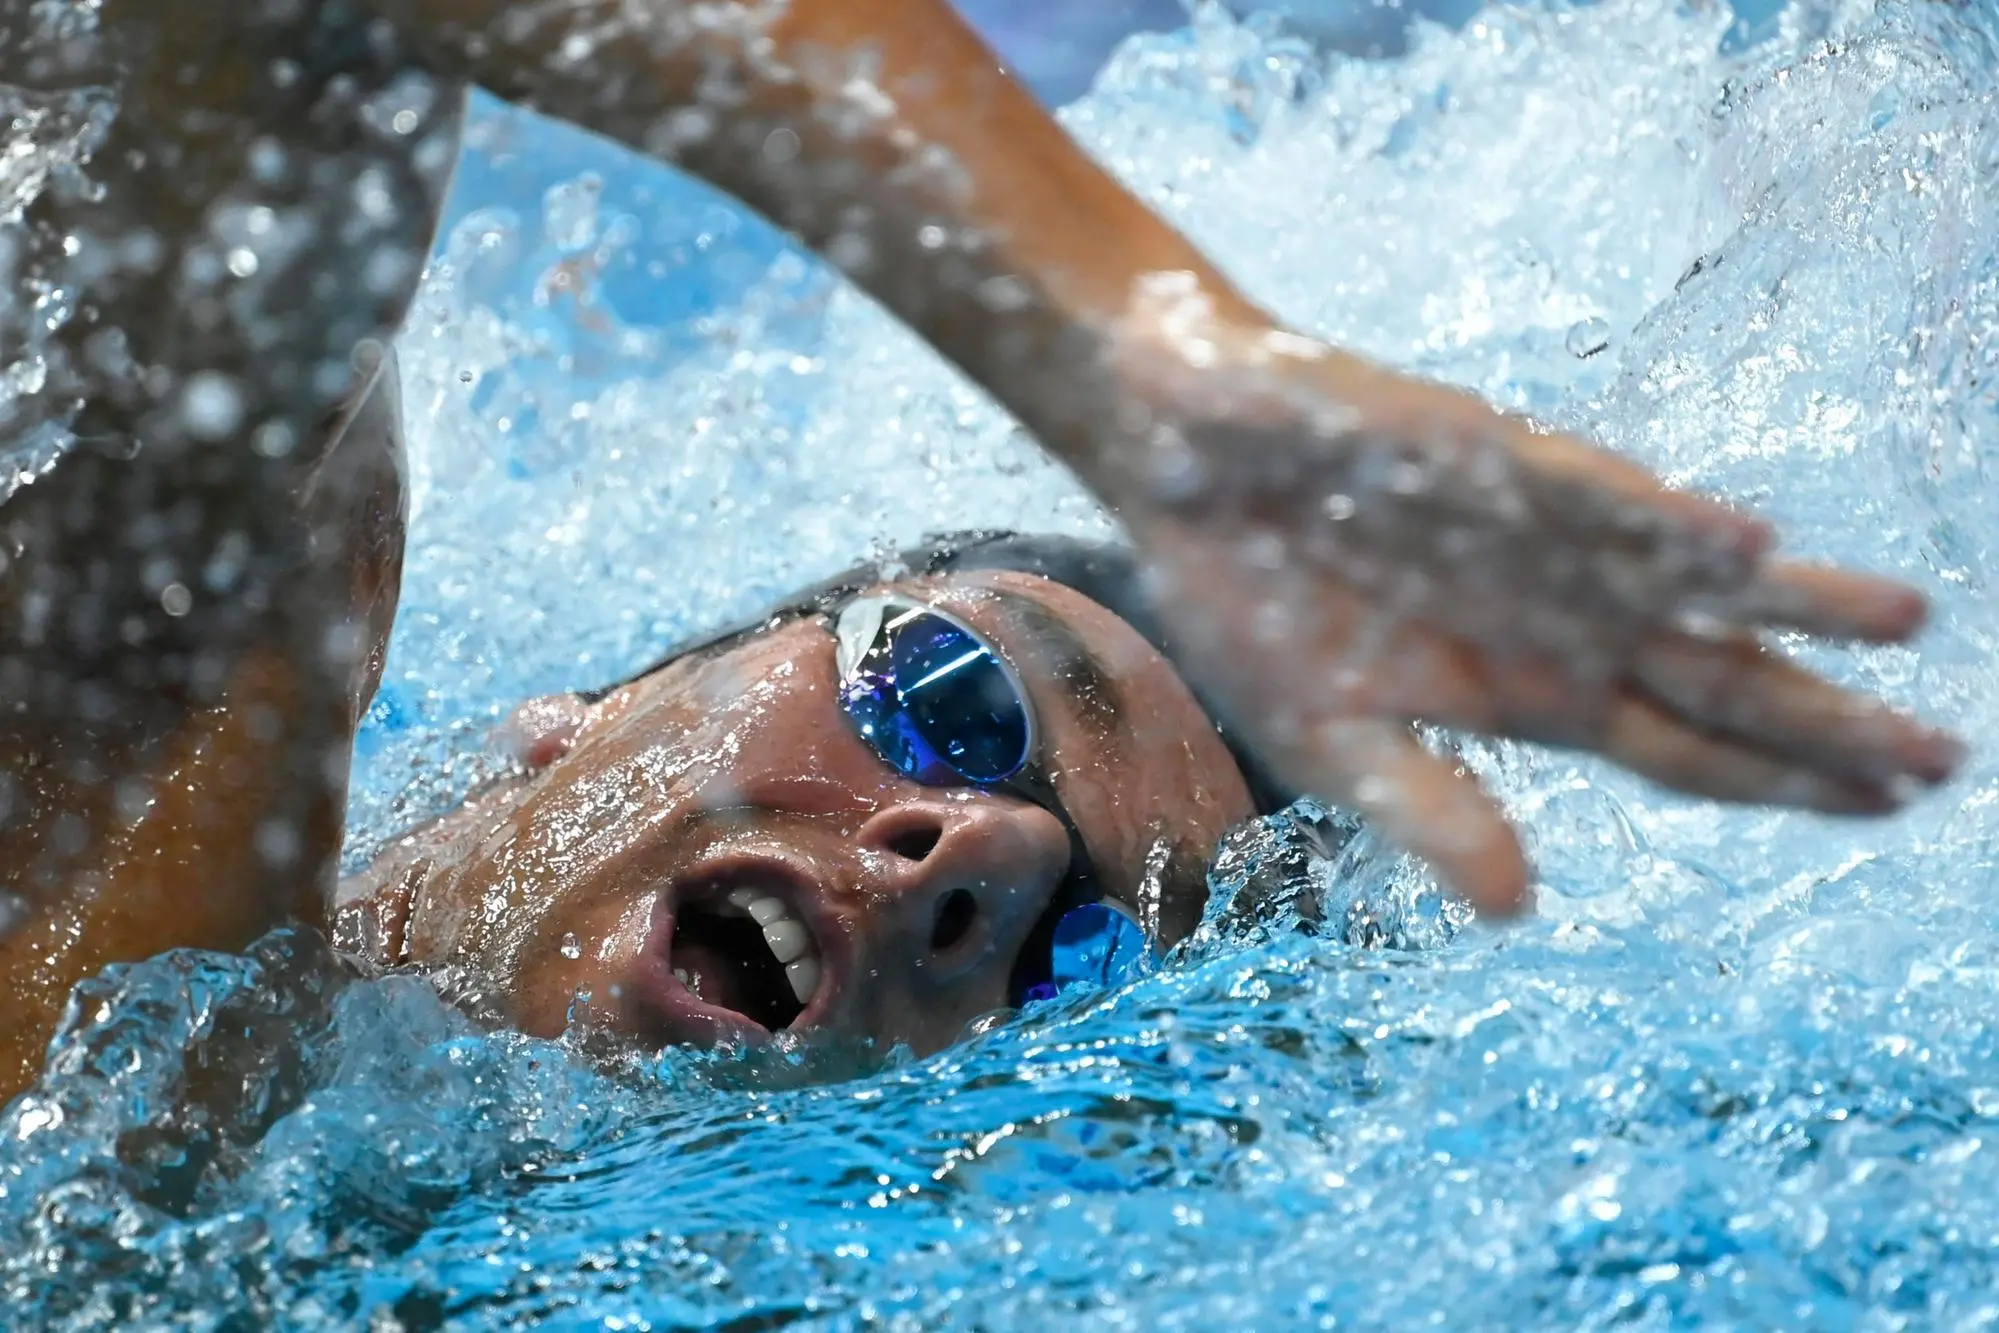 epa10033781 Gregorio Paltrinieri of Italy on his way to win the men’s 1500m freestyle final of the 19th FINA World Championships in Duna Arena in Budapest, Hungary, 25 June 2022. EPA/Tamas Kovacs HUNGARY OUT